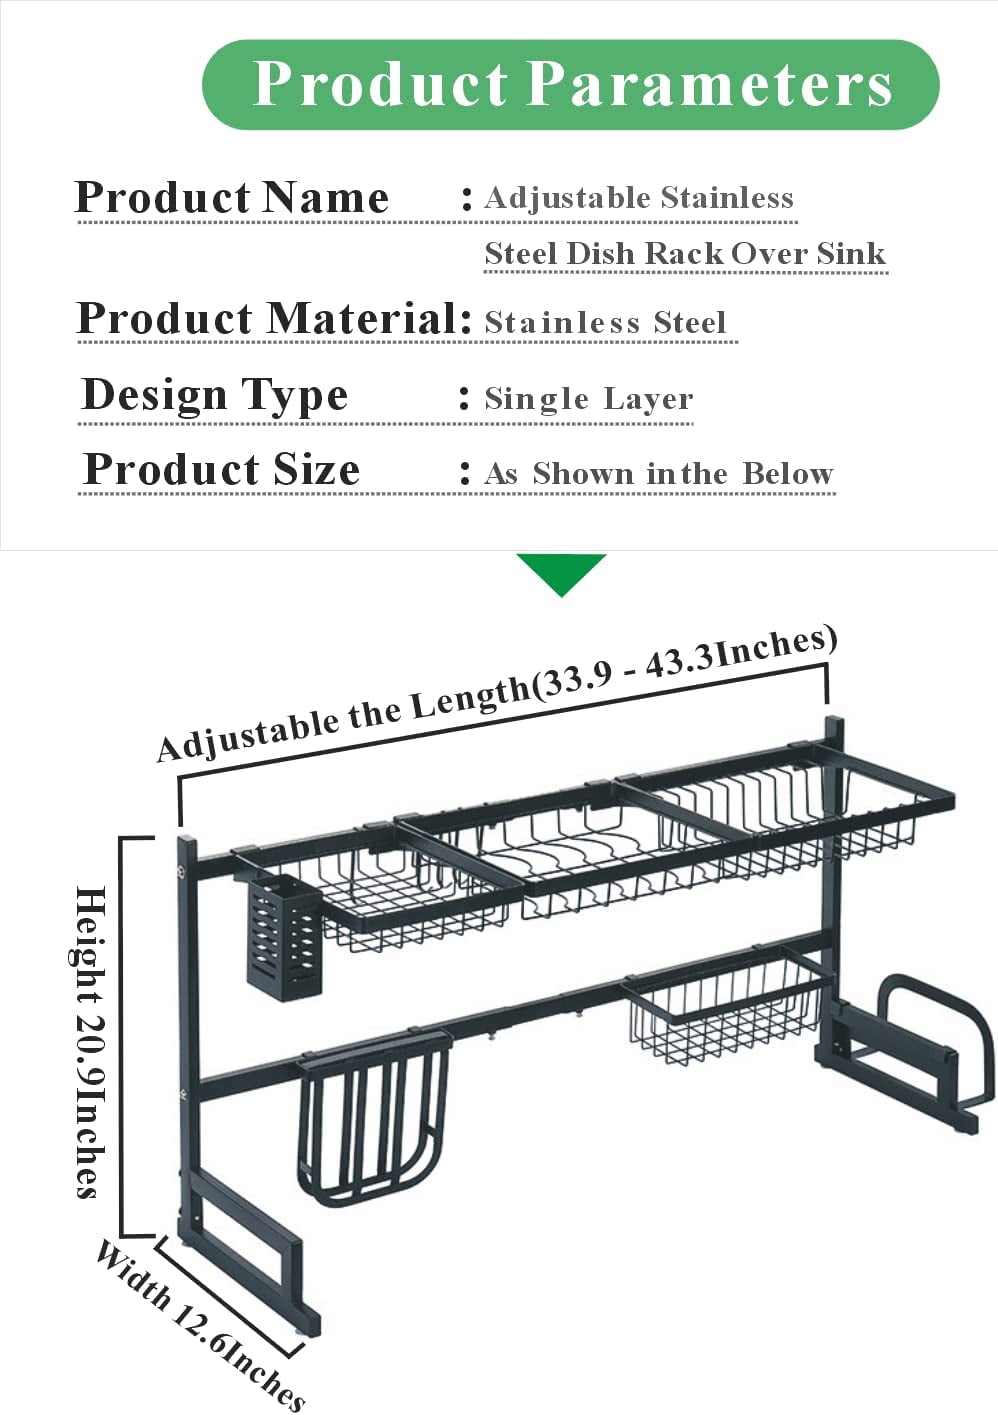 Over the Sink Dish Rack 2 Tier Dish Drying Rack 33x12x19 inches Large Dish  Drainer For Kitchen Sink Stainless Steel